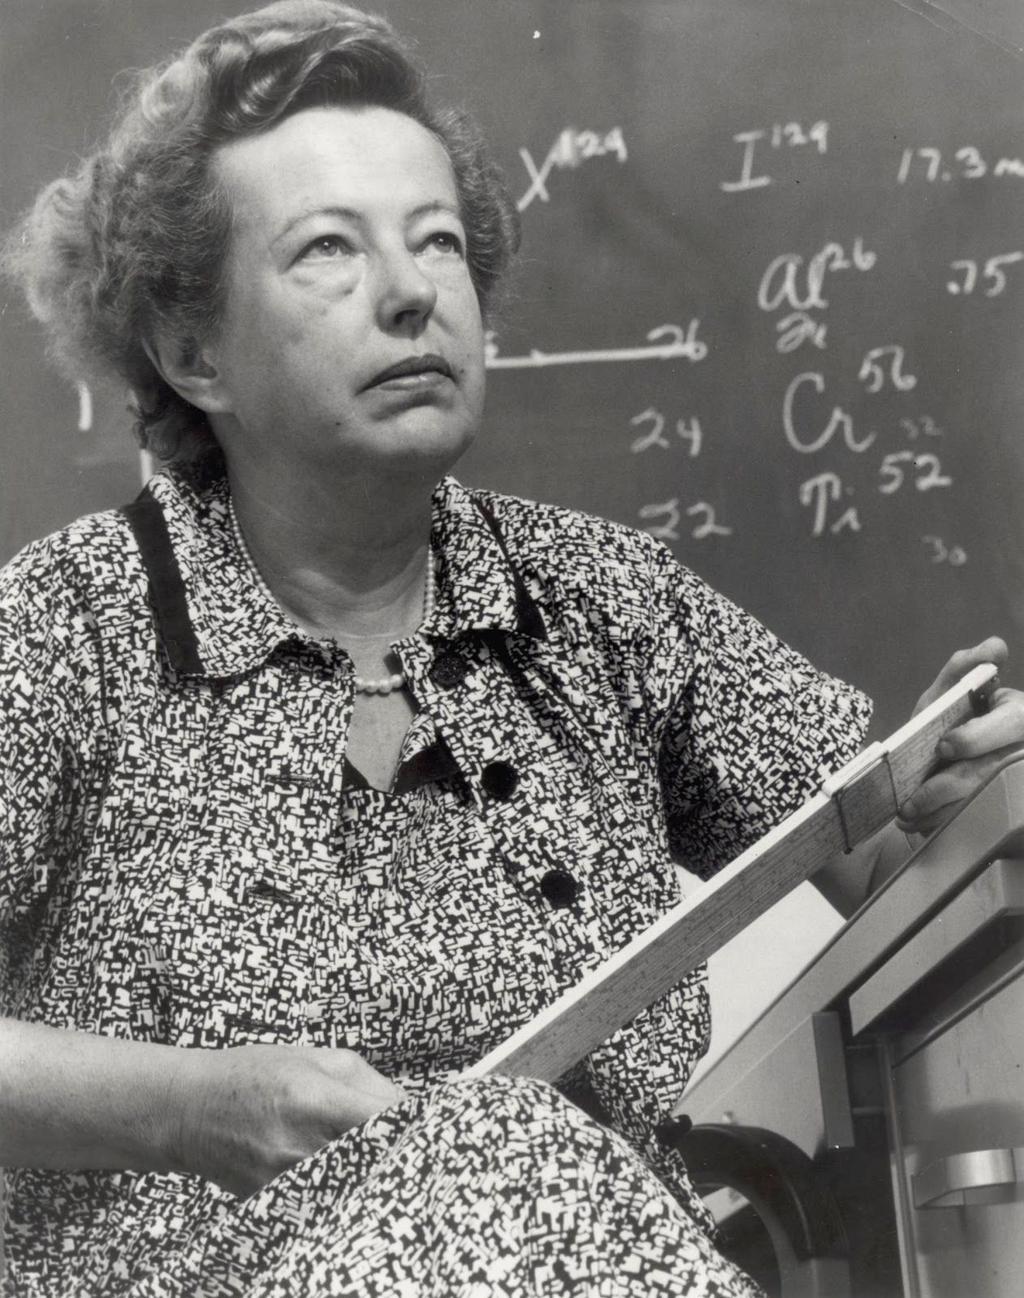 8 9.4 Maria Goeppert-Mayer: Maria Goeppert-Mayer was the second woman to win the Nobel Prize for physics, after Marie Curie.